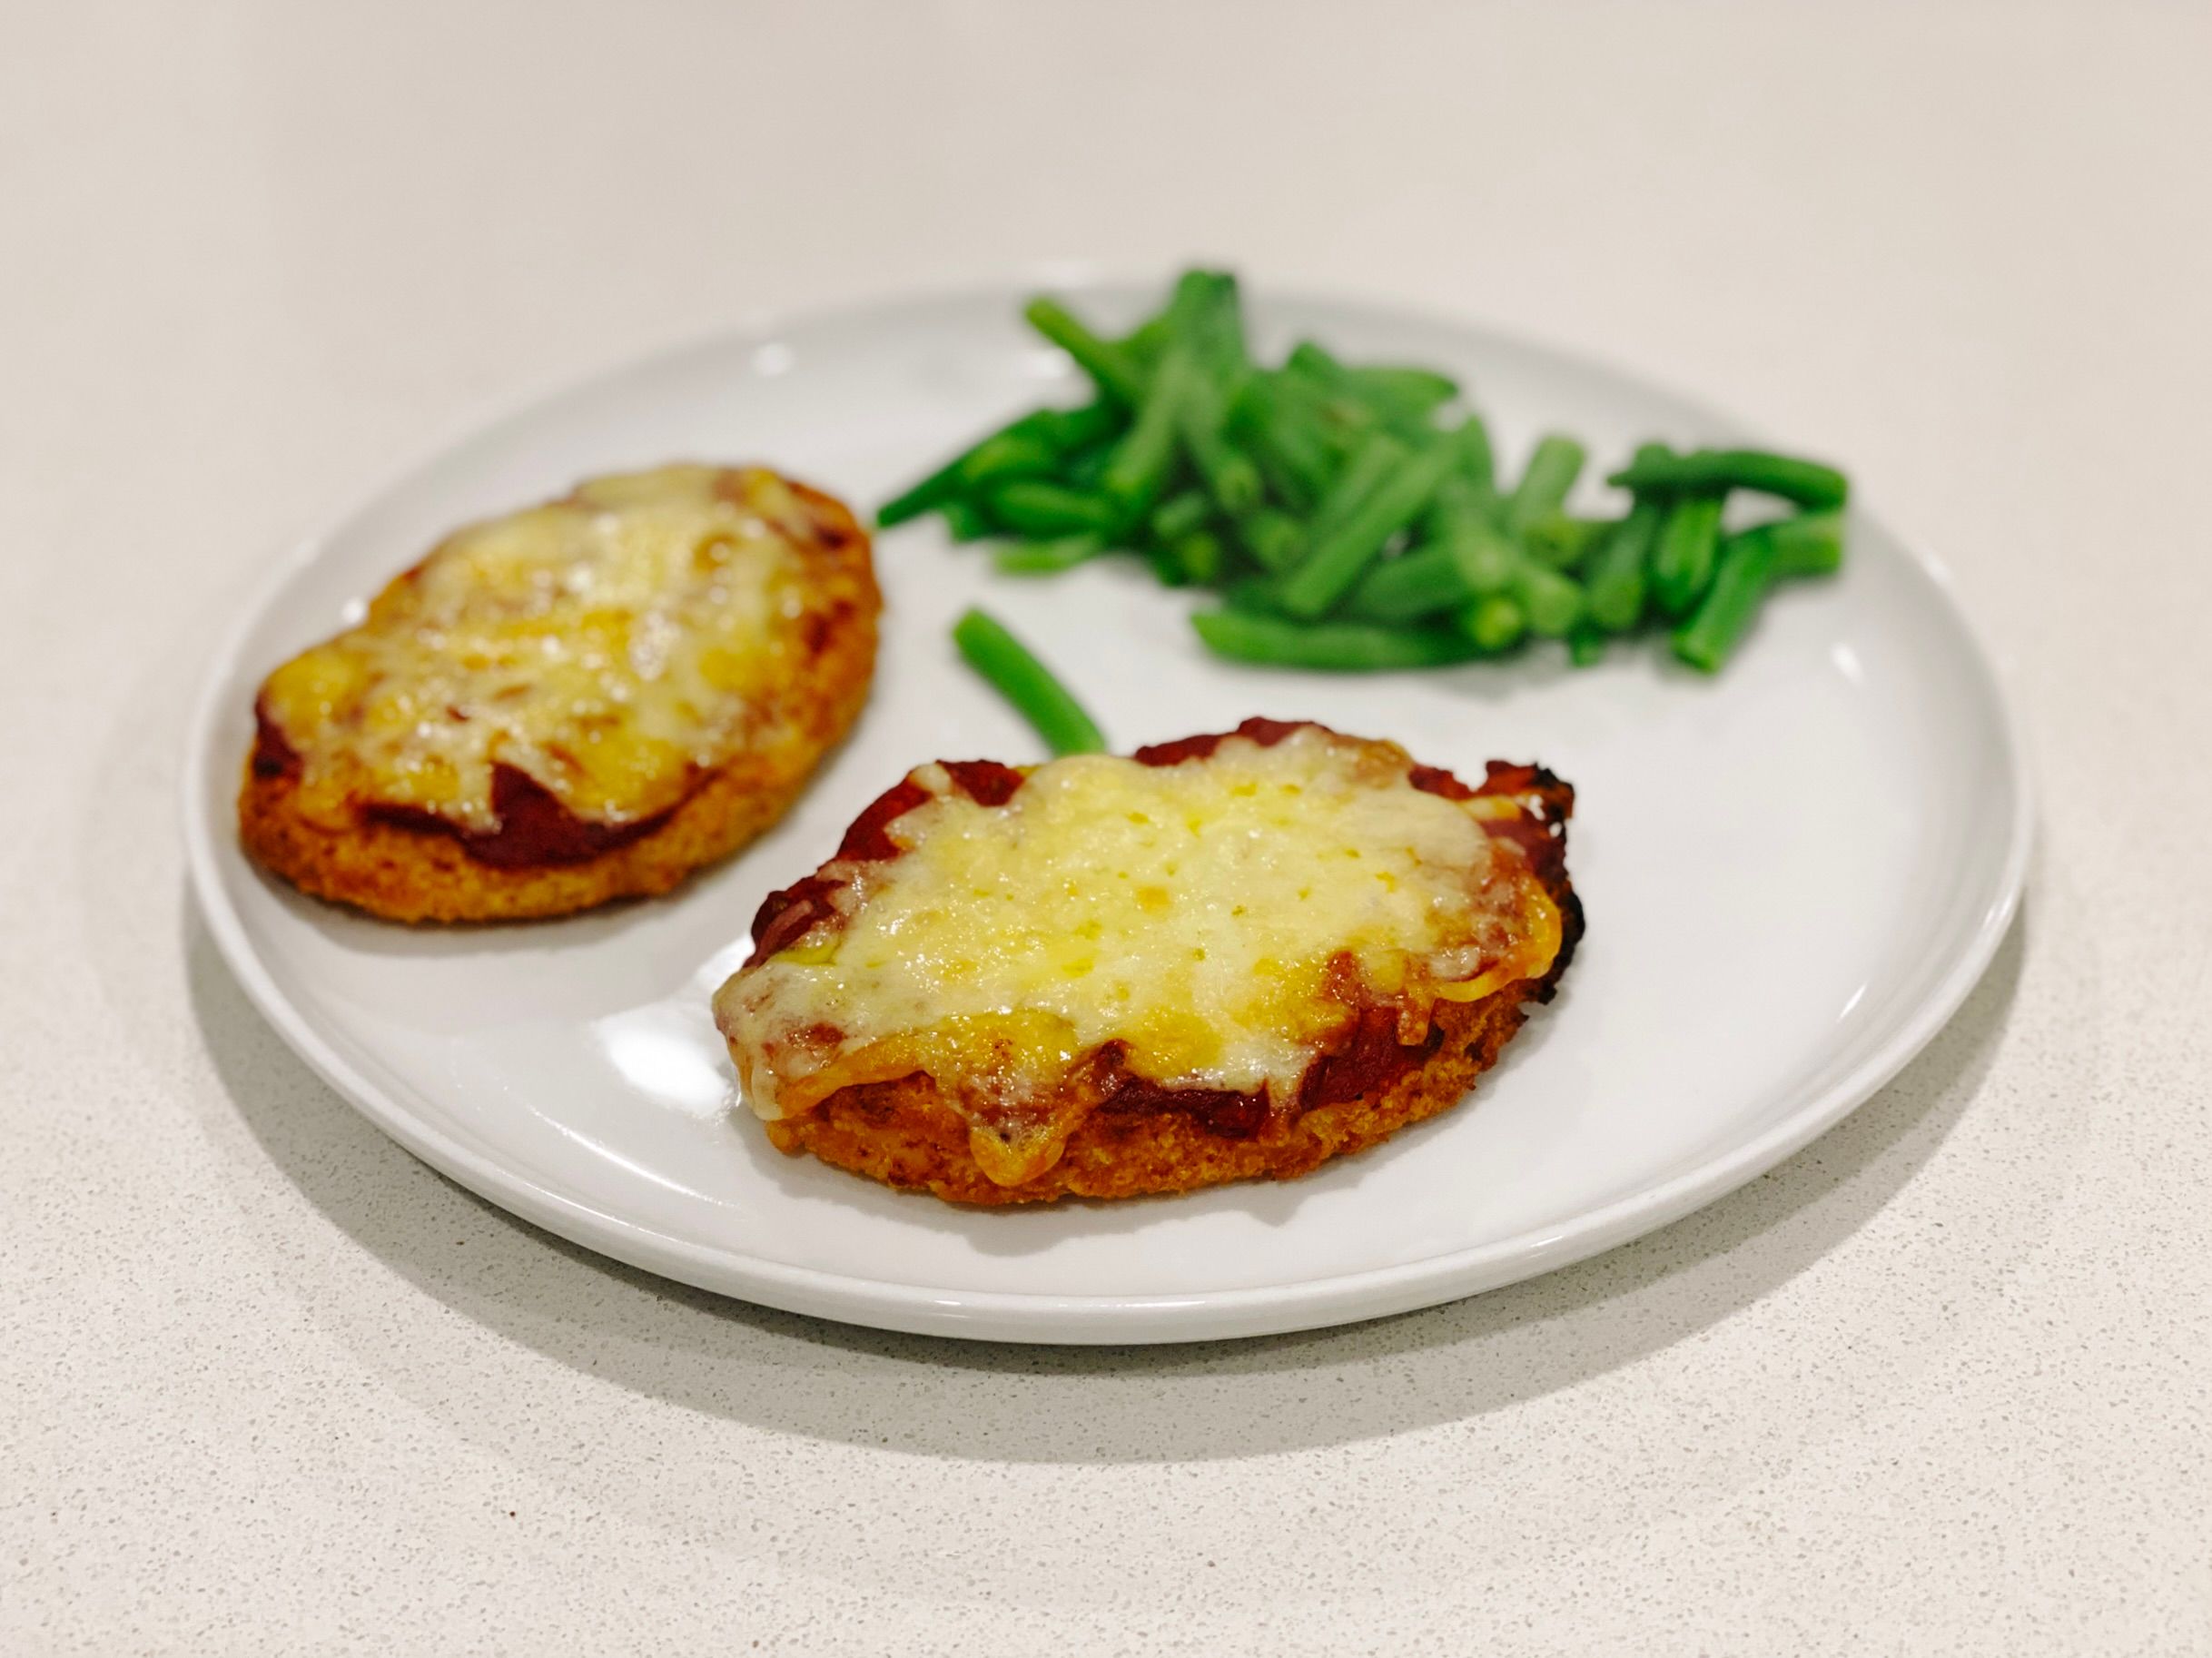 A photo of two pieces of chicken schnitzel with tomato paste and cheese on top, sitting on a white plate with some green beans next to them.